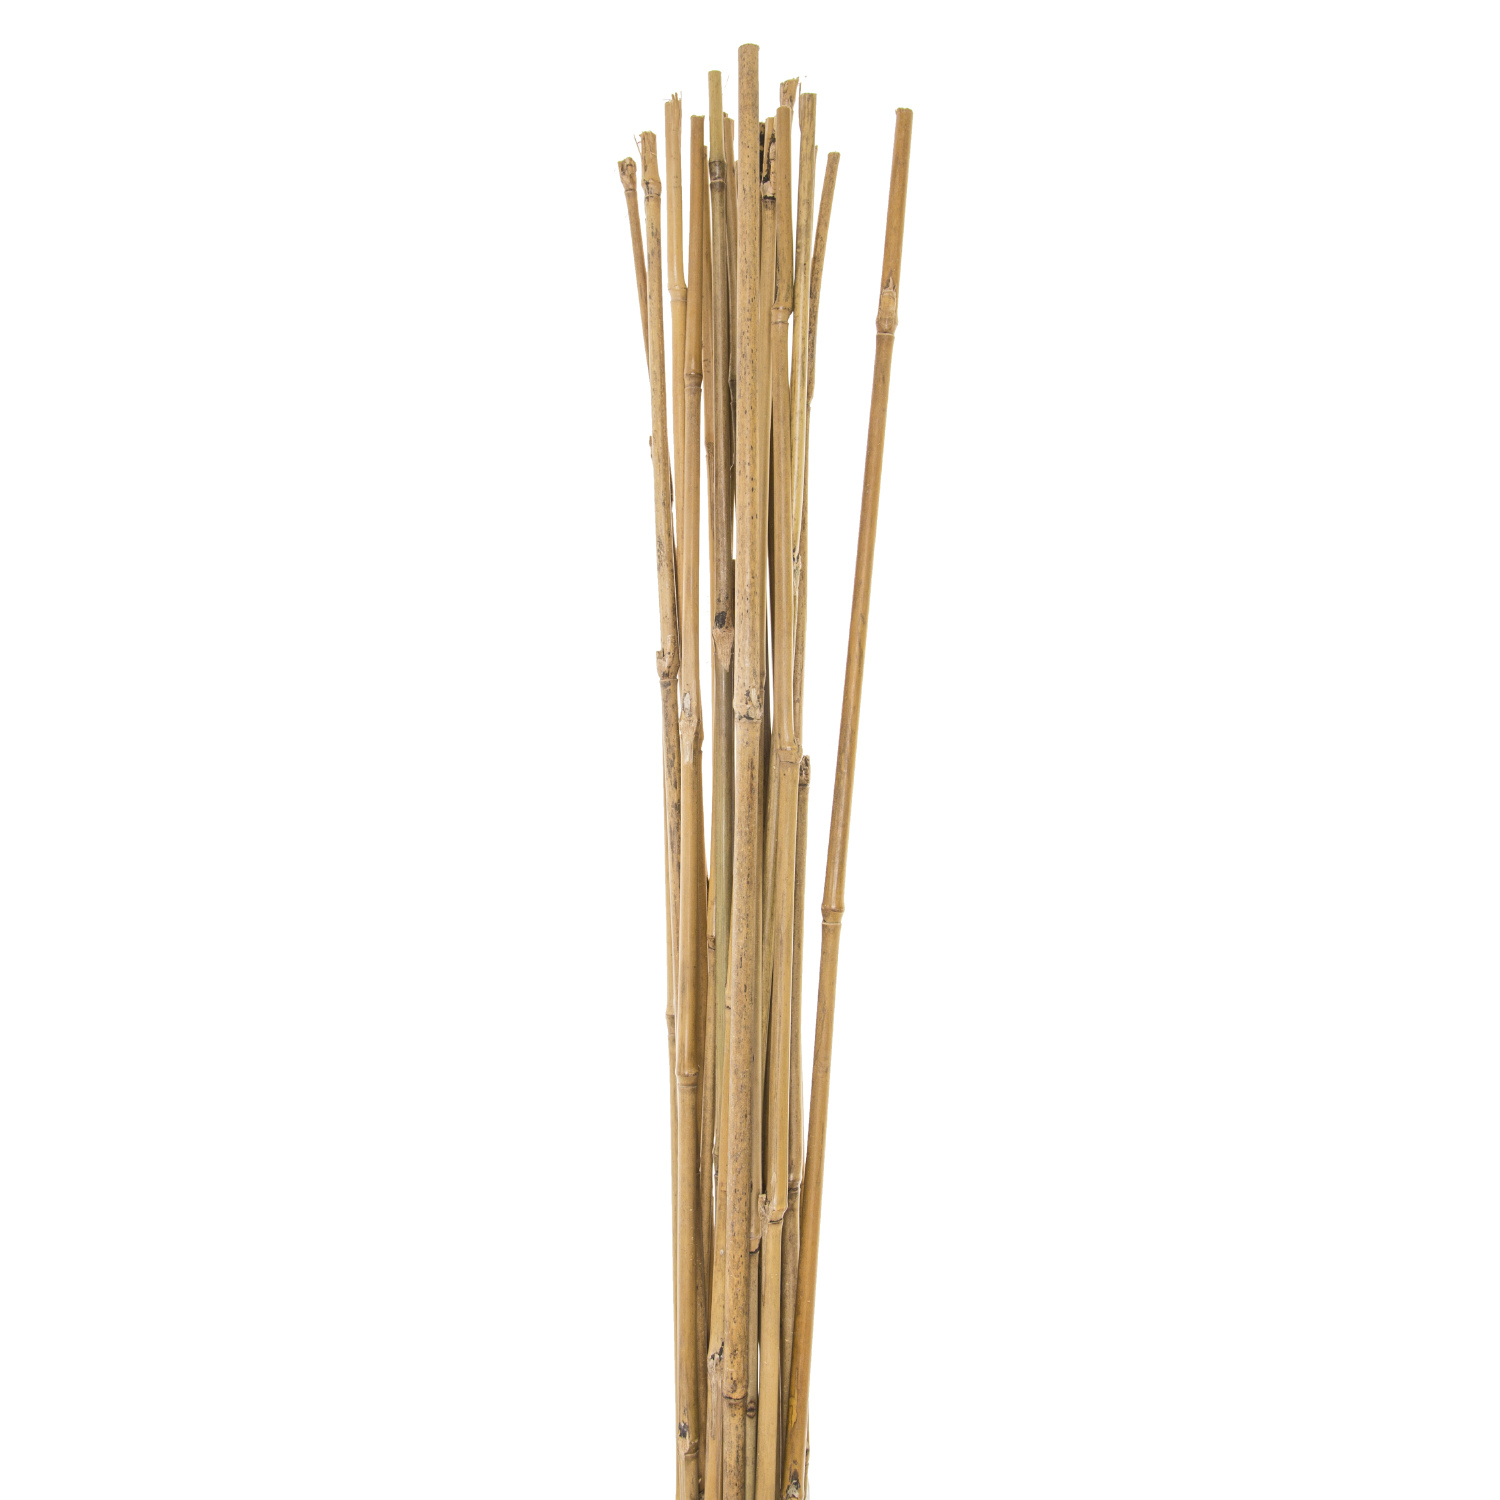 Pack of Bamboo Canes - 6ft Image 1